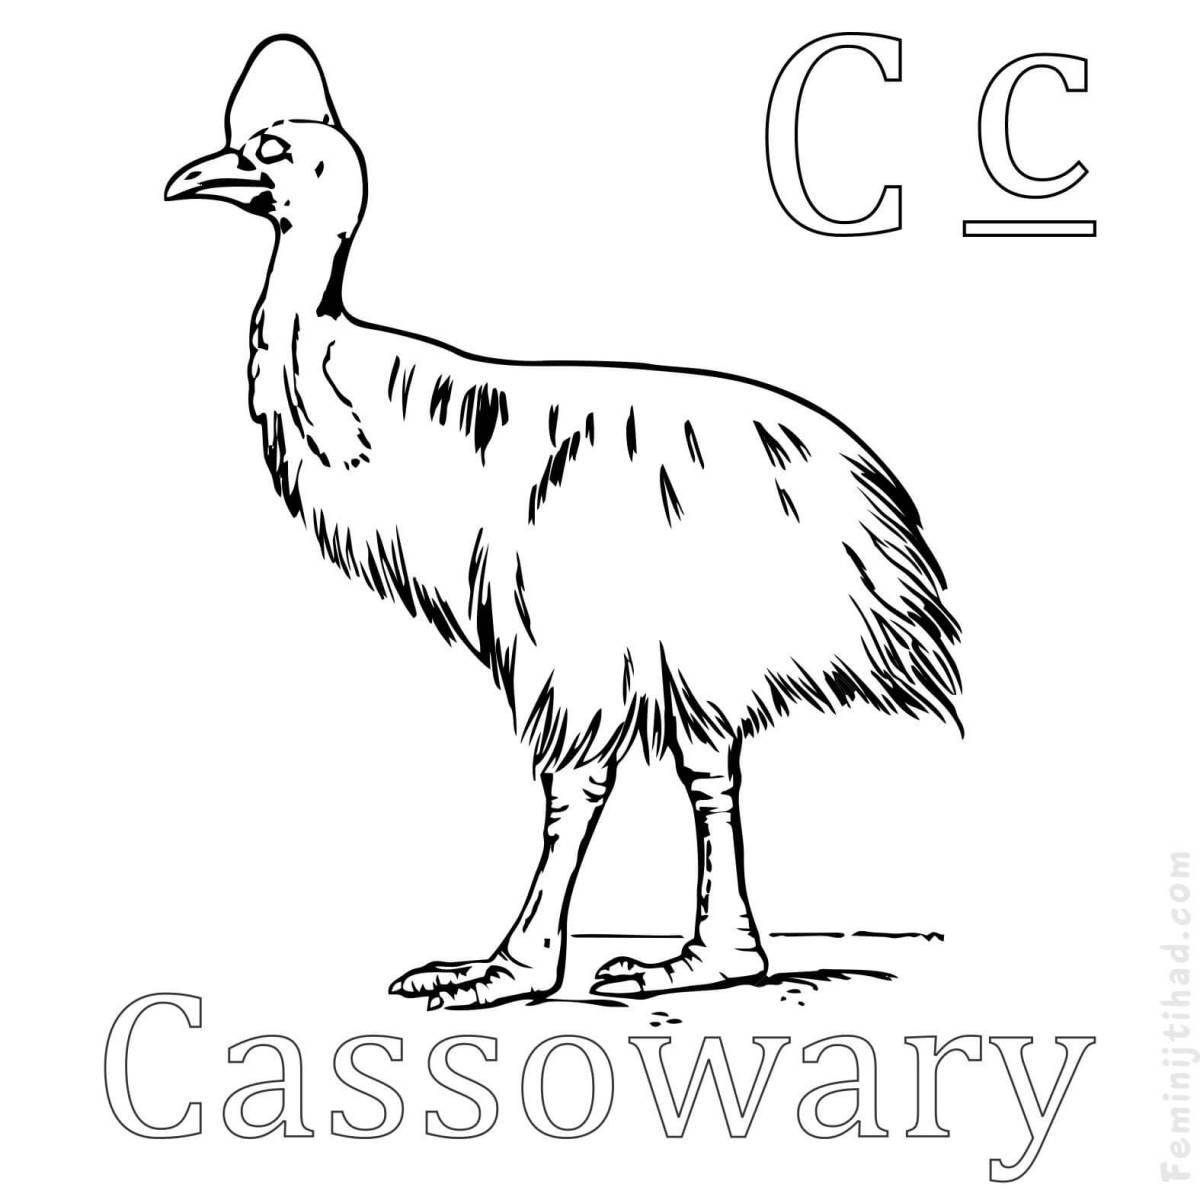 Amazing cassowary coloring book for kids